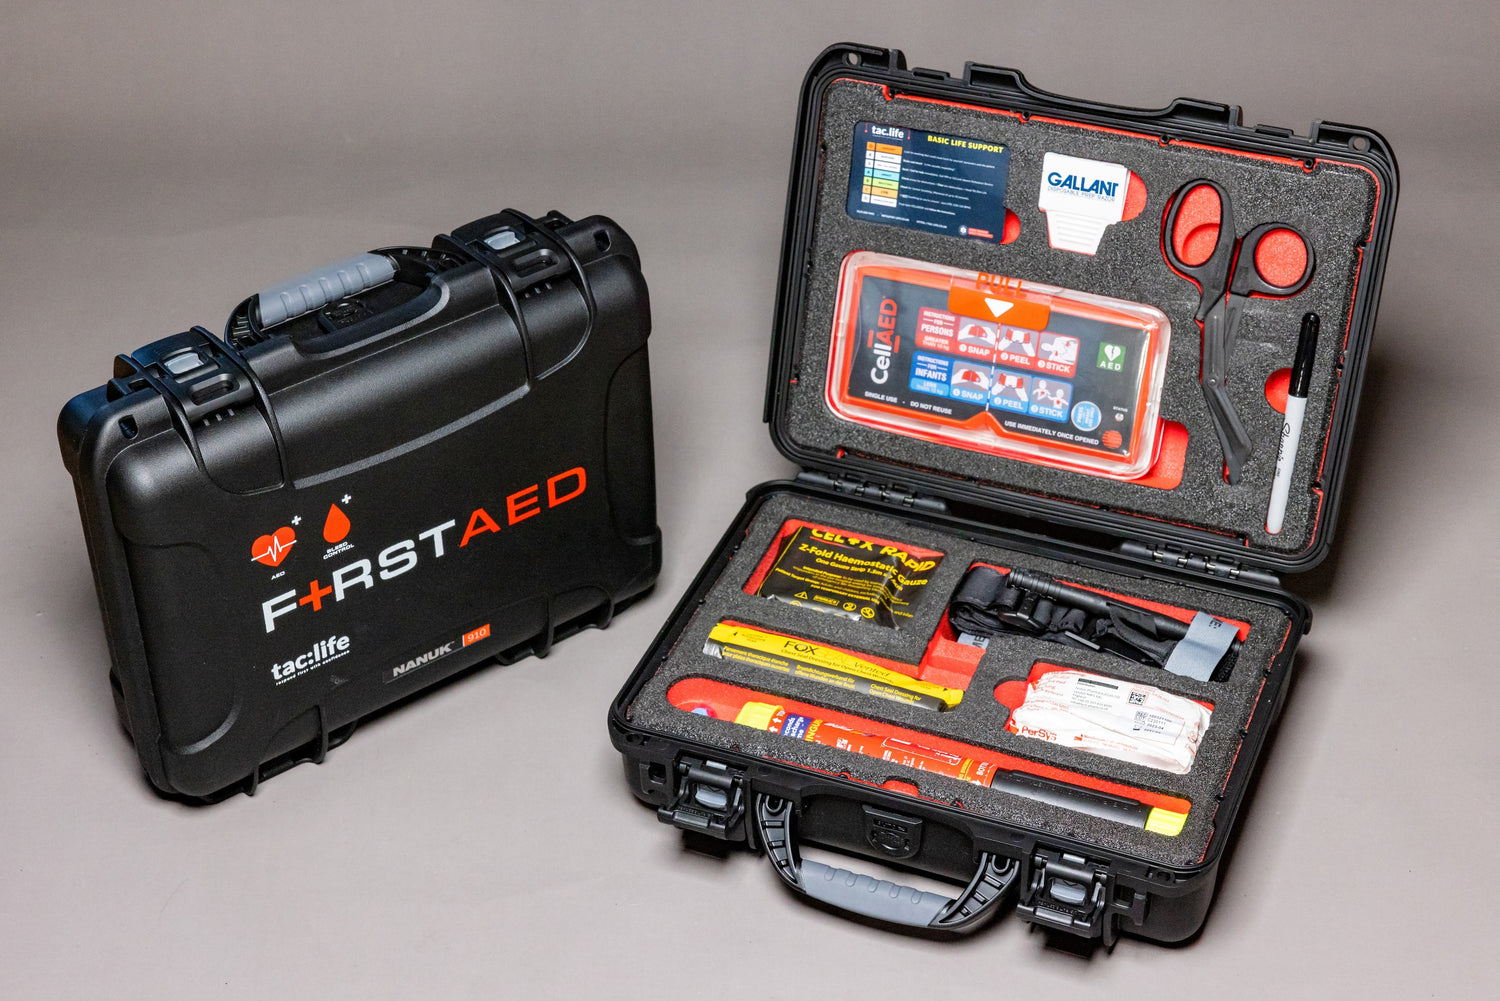 A red rectangular box with a white cross symbol on it, containing medical equipment for first aid response to trauma and cardiac incidents. The box is opened, revealing its contents, including a bleed control kit, Fire Safety Stick, and CellAED device. It can be mounted on walls or transported in vehicles, providing a versatile option for emergency preparedness.